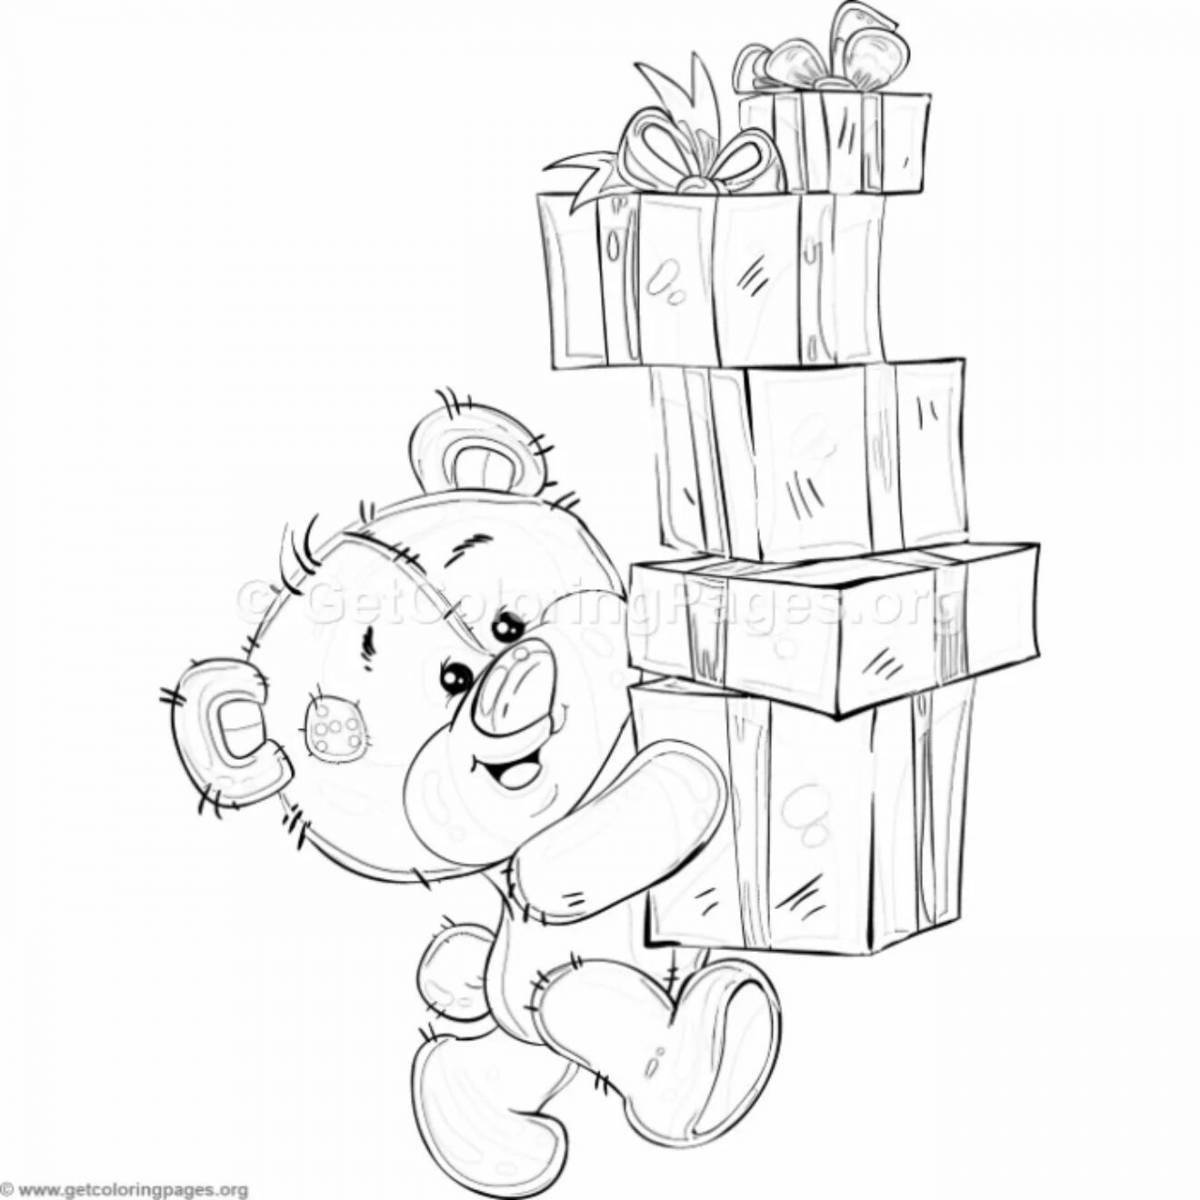 Coloring book shining bear with a gift